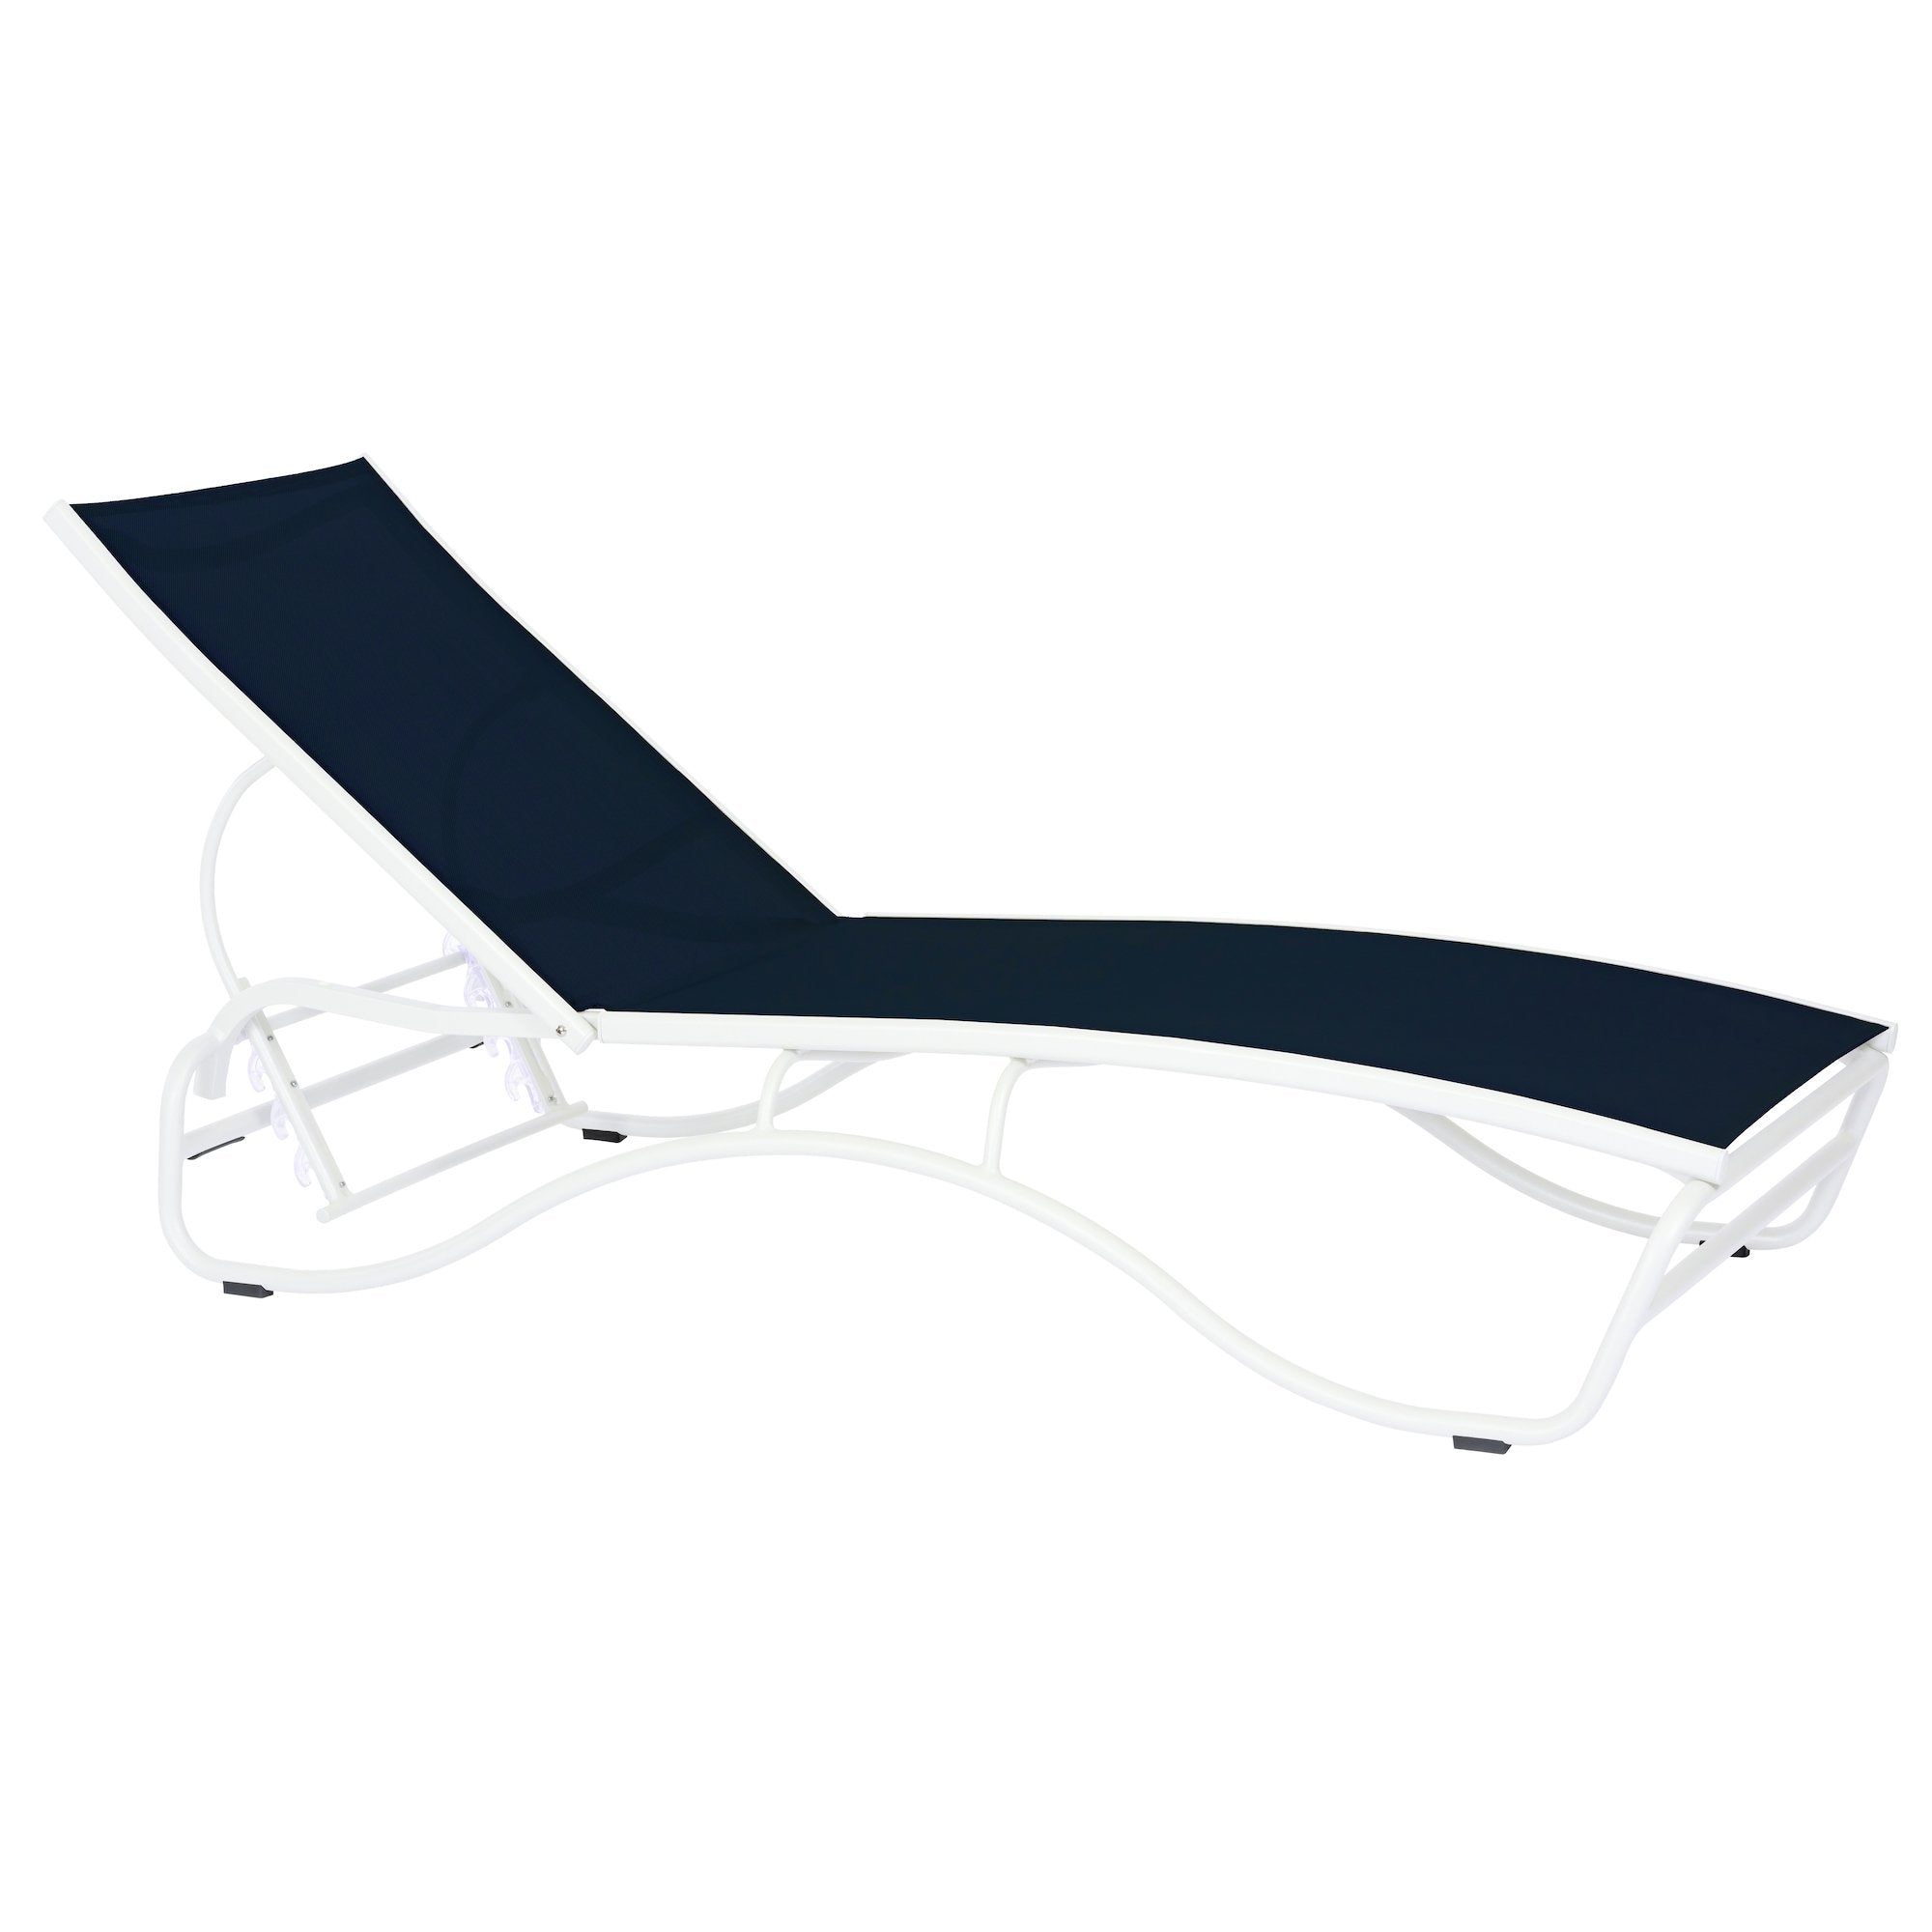 Duramax Lounge Chairs Navy Blue Corsica Lounger Set of 2 (3 Colors)